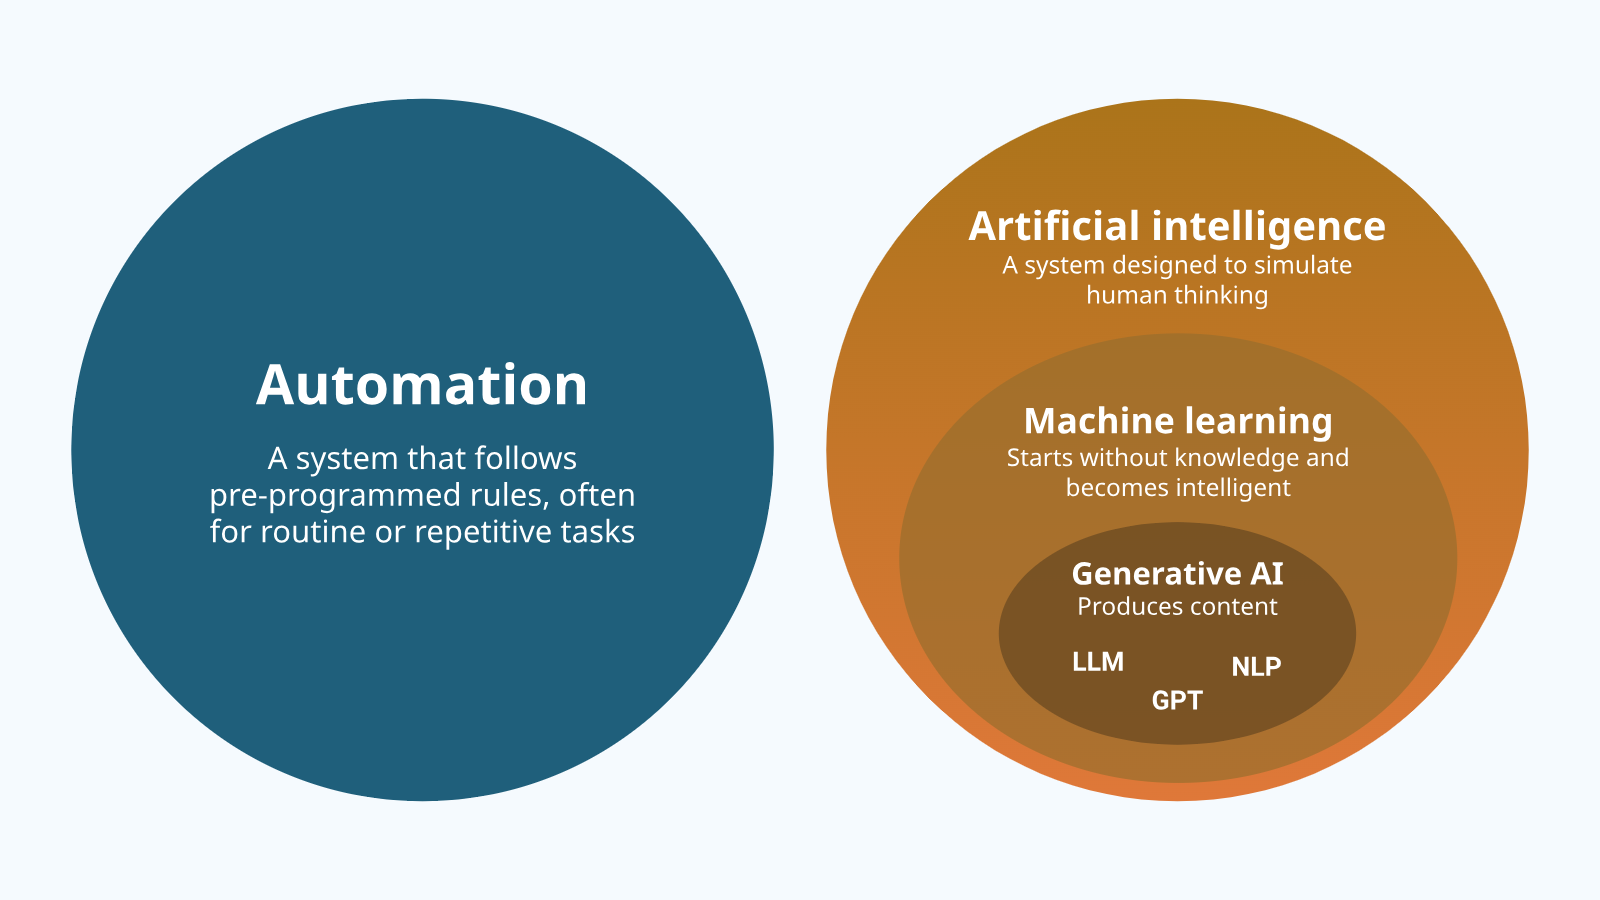 Automation is not the same as AI, which includes machine learning and generative AI tools